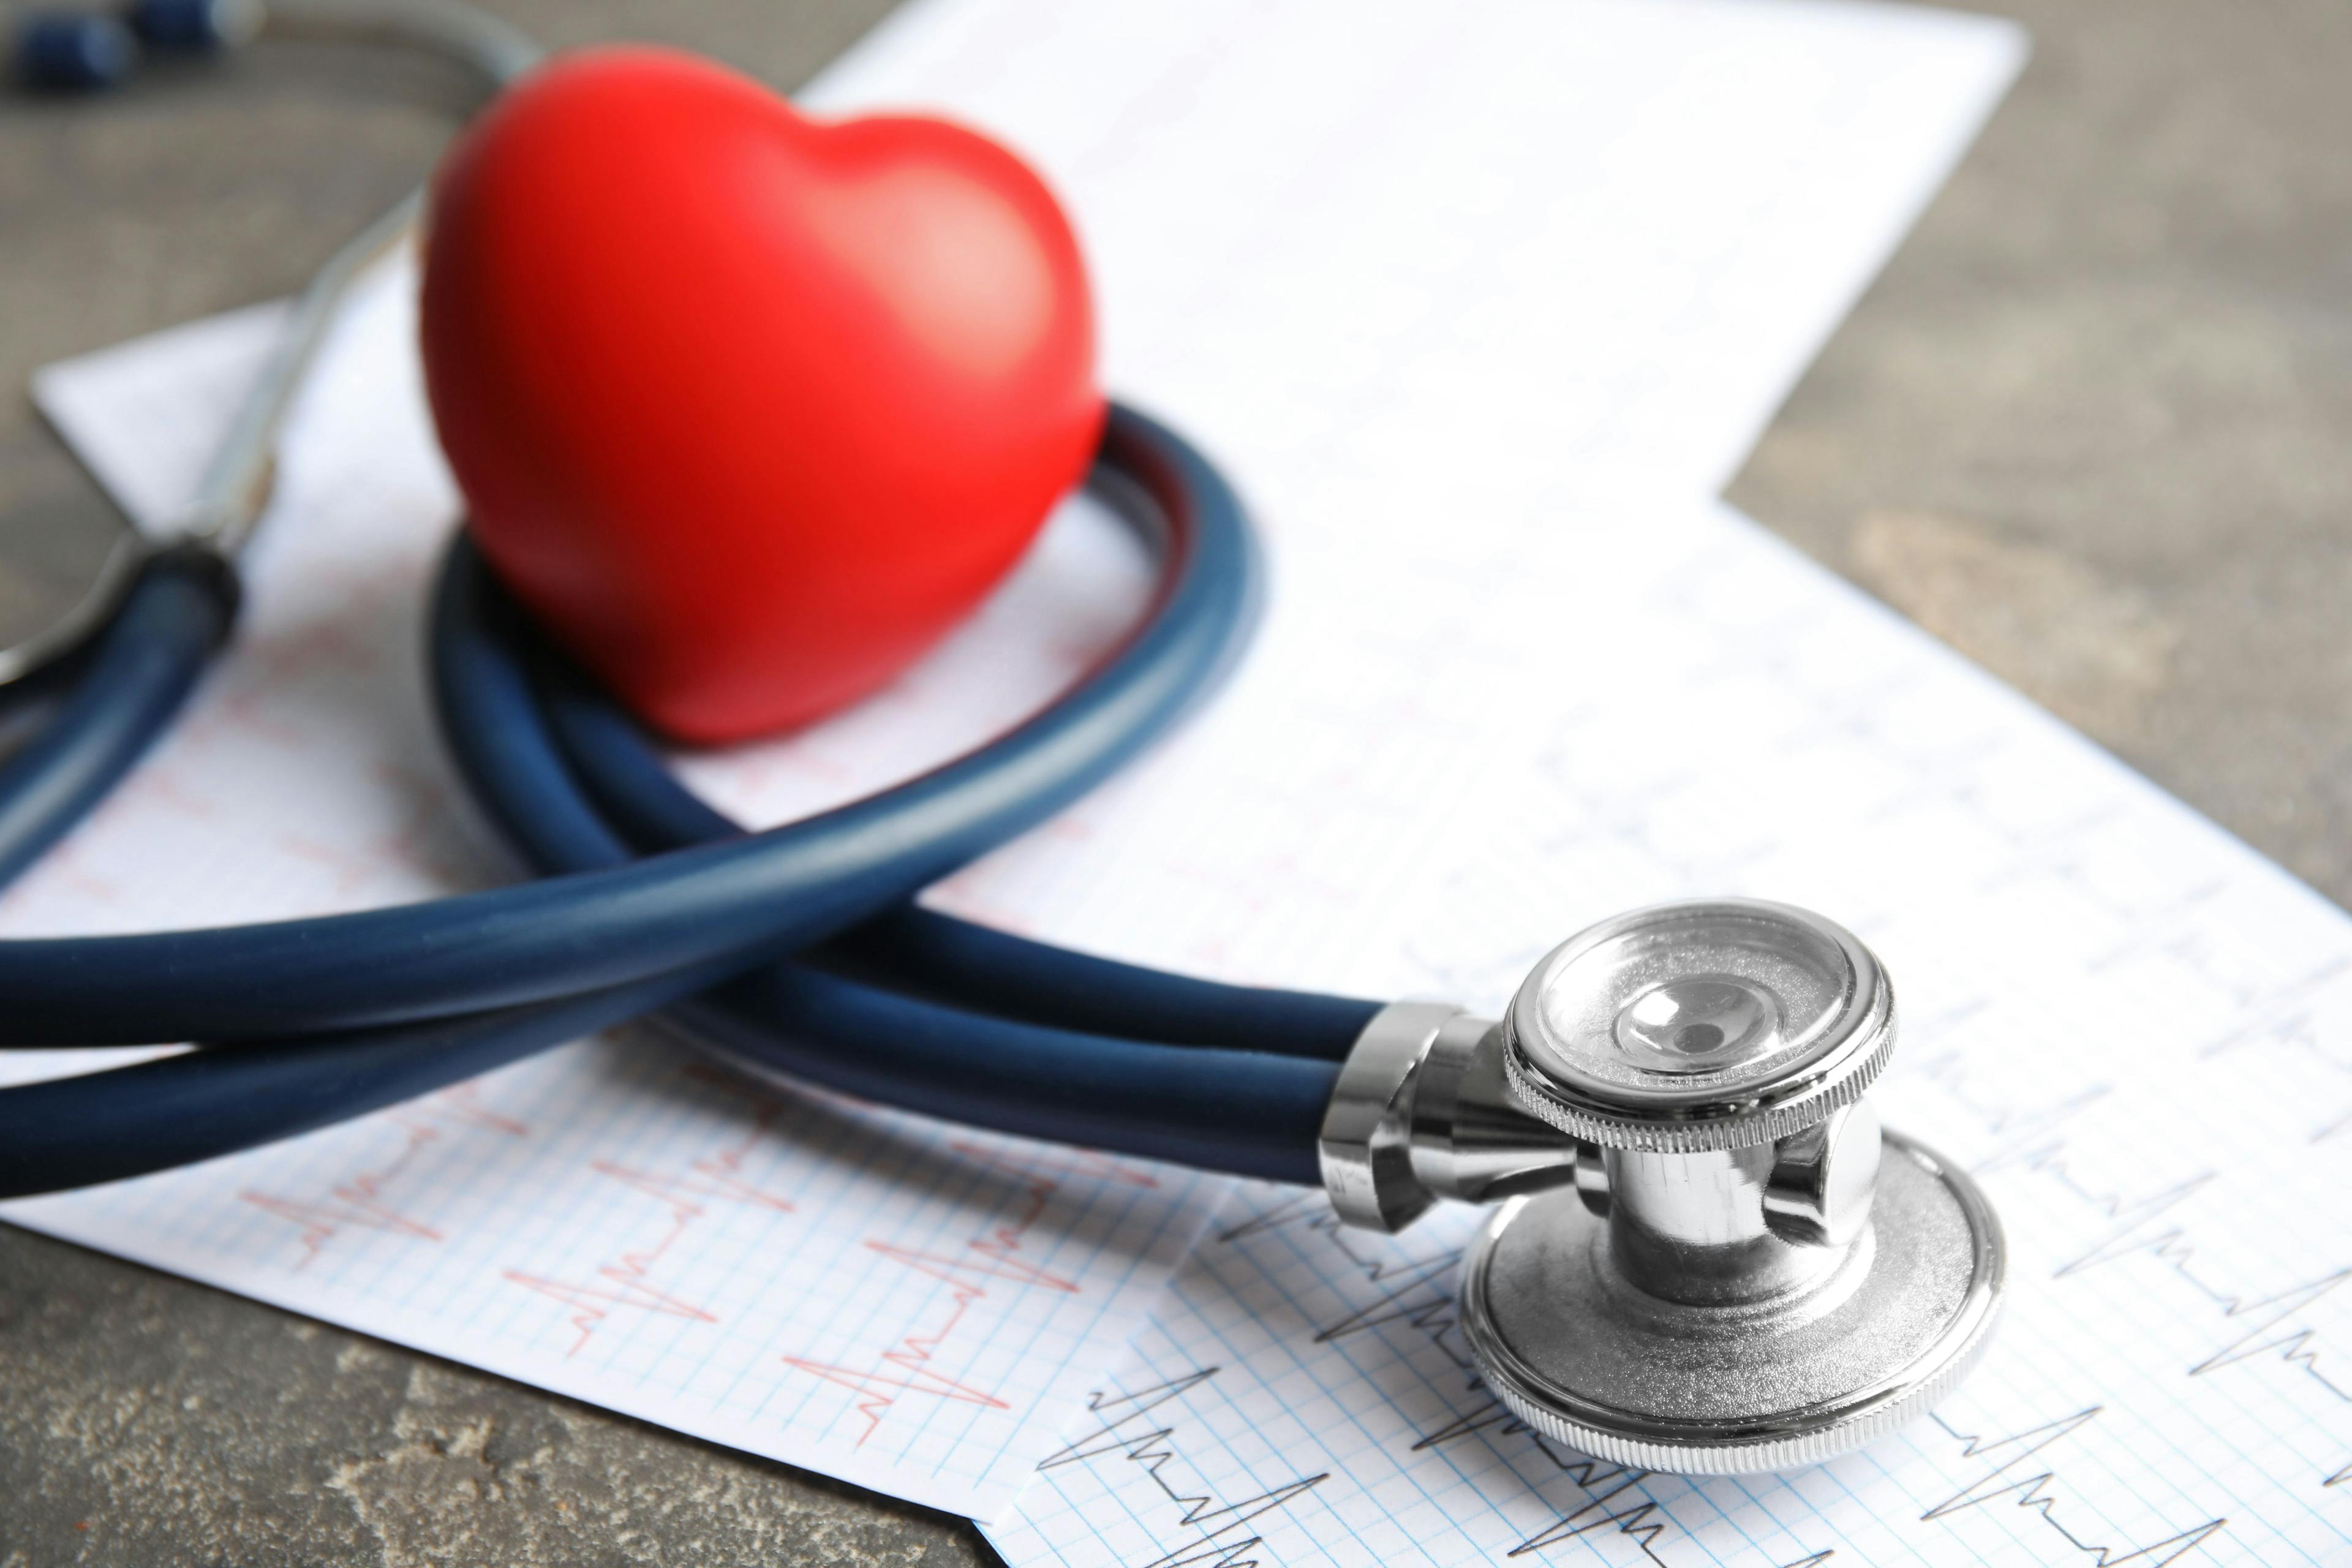 Stethoscope, red heart and cardiogram on gray table. Cardiology concept | Image Credit: New Africa - stock.adobe.com